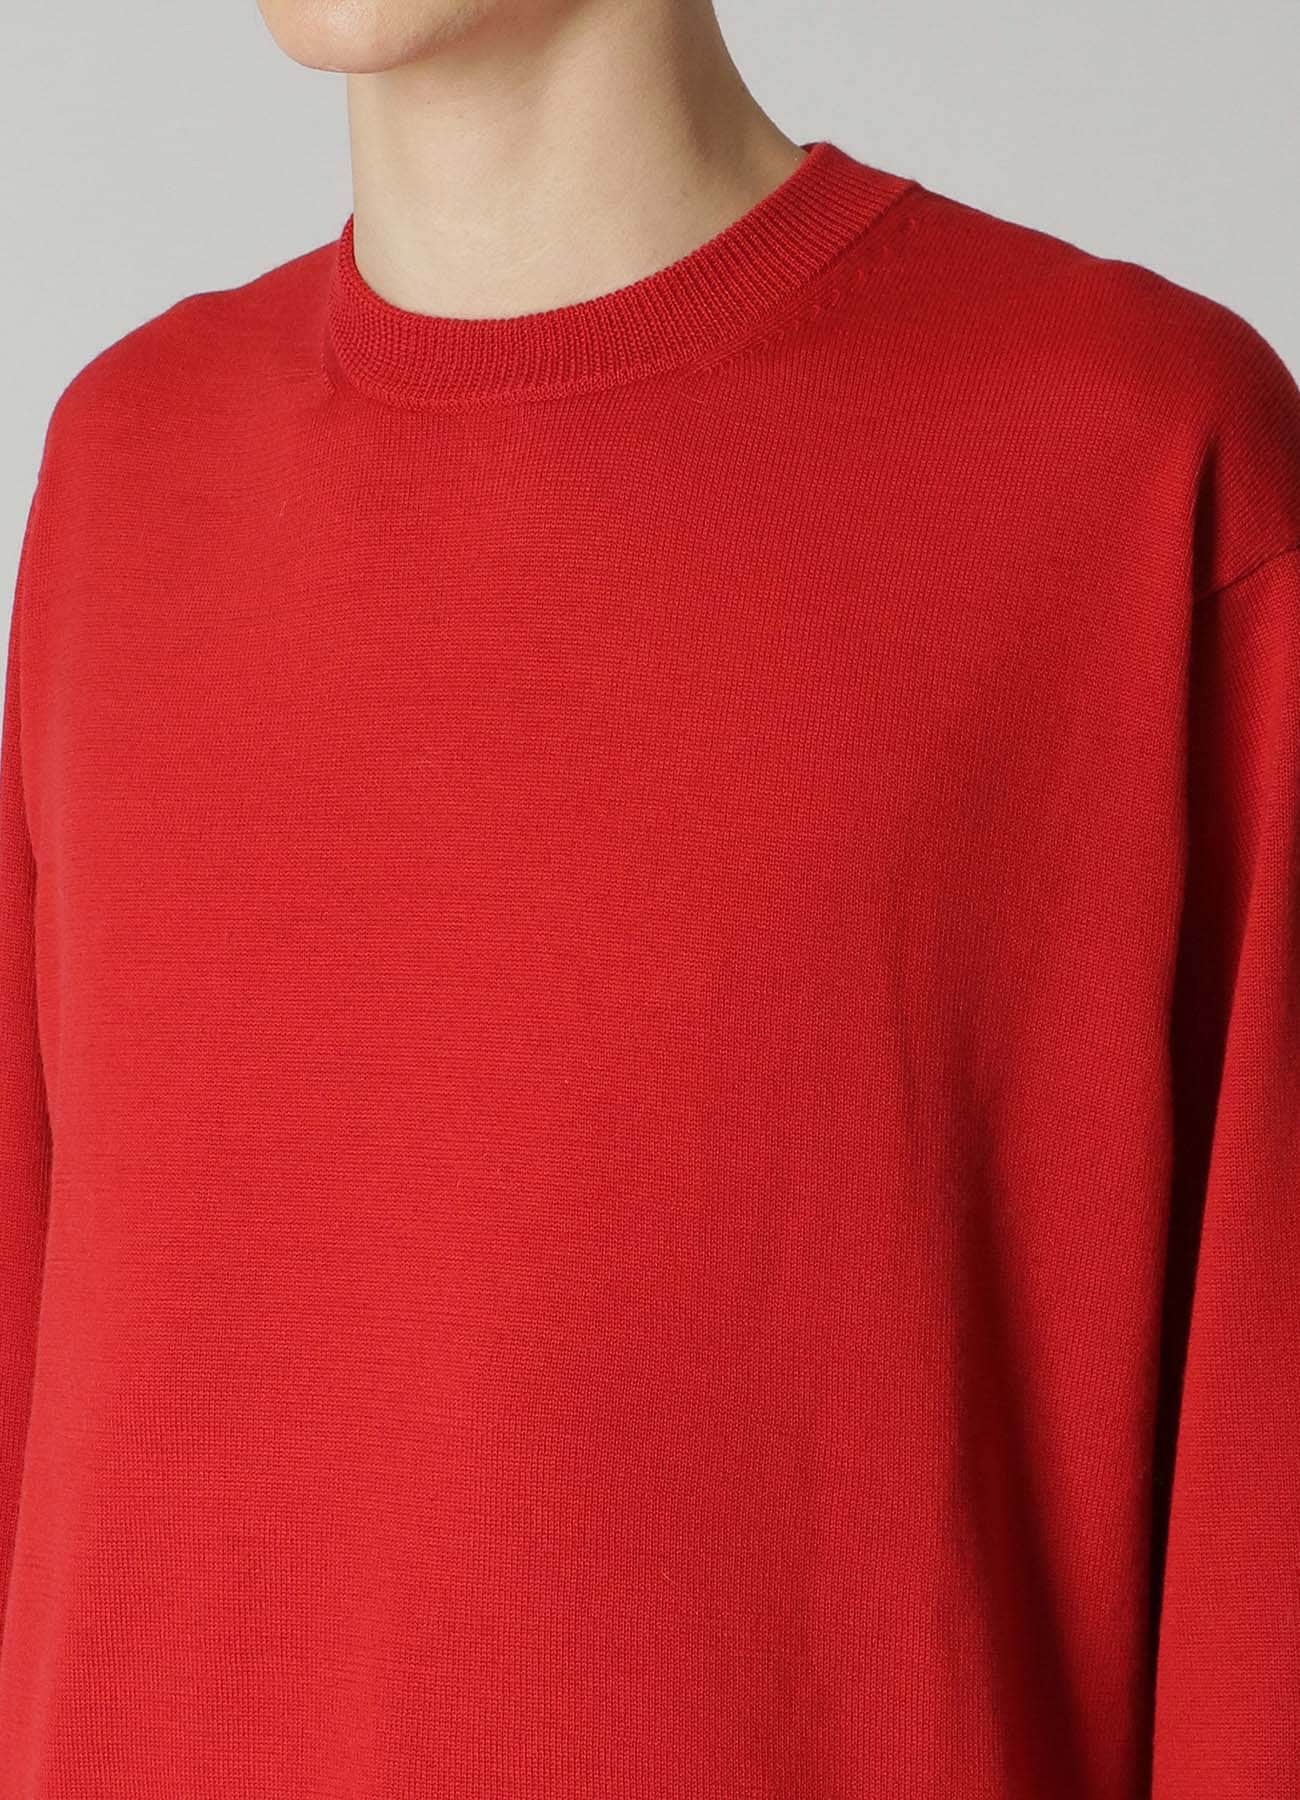 12G JERSEY Y's for men LOGO ROUND NECK KNIT